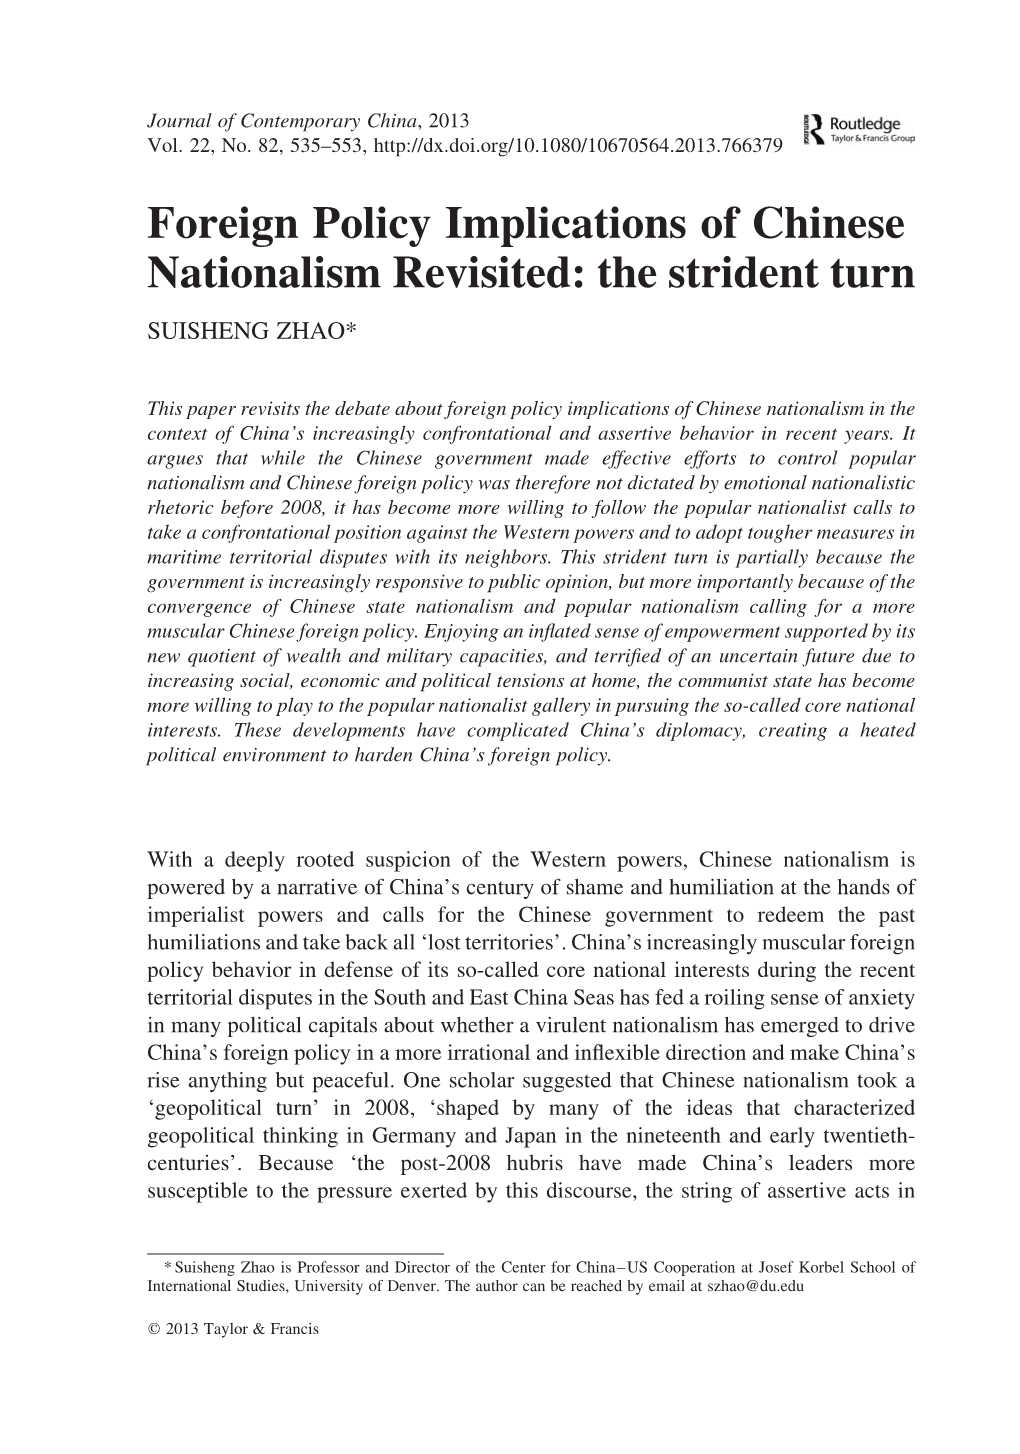 Foreign Policy Implications of Chinese Nationalism Revisited: the Strident Turn SUISHENG ZHAO*